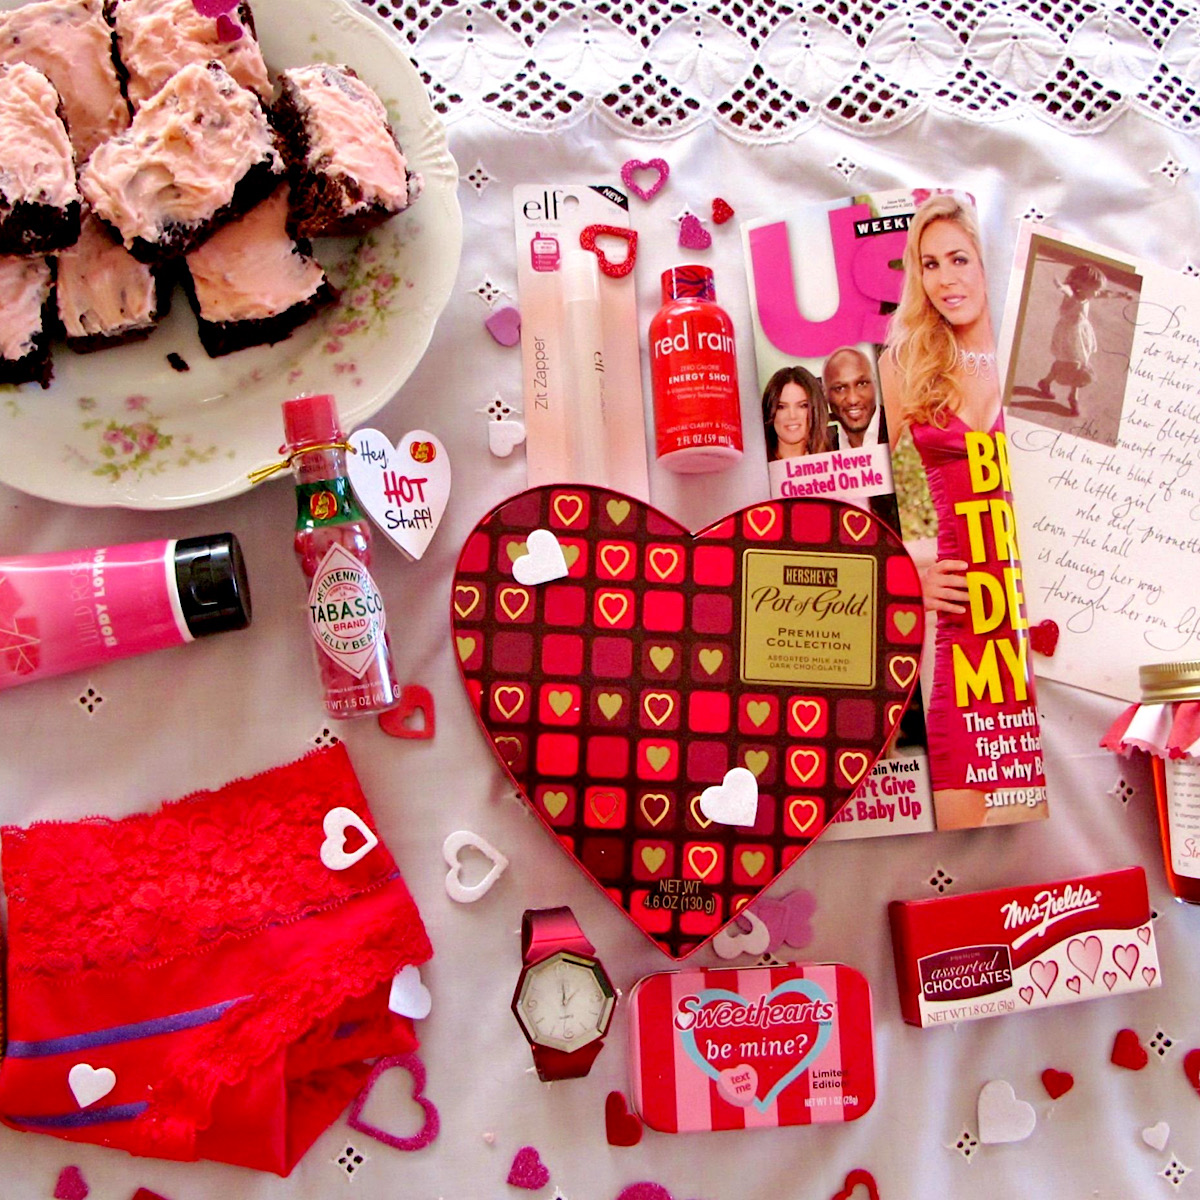 Items to go in a Valentines care package for a college girl, laid out on a white tablecloth.